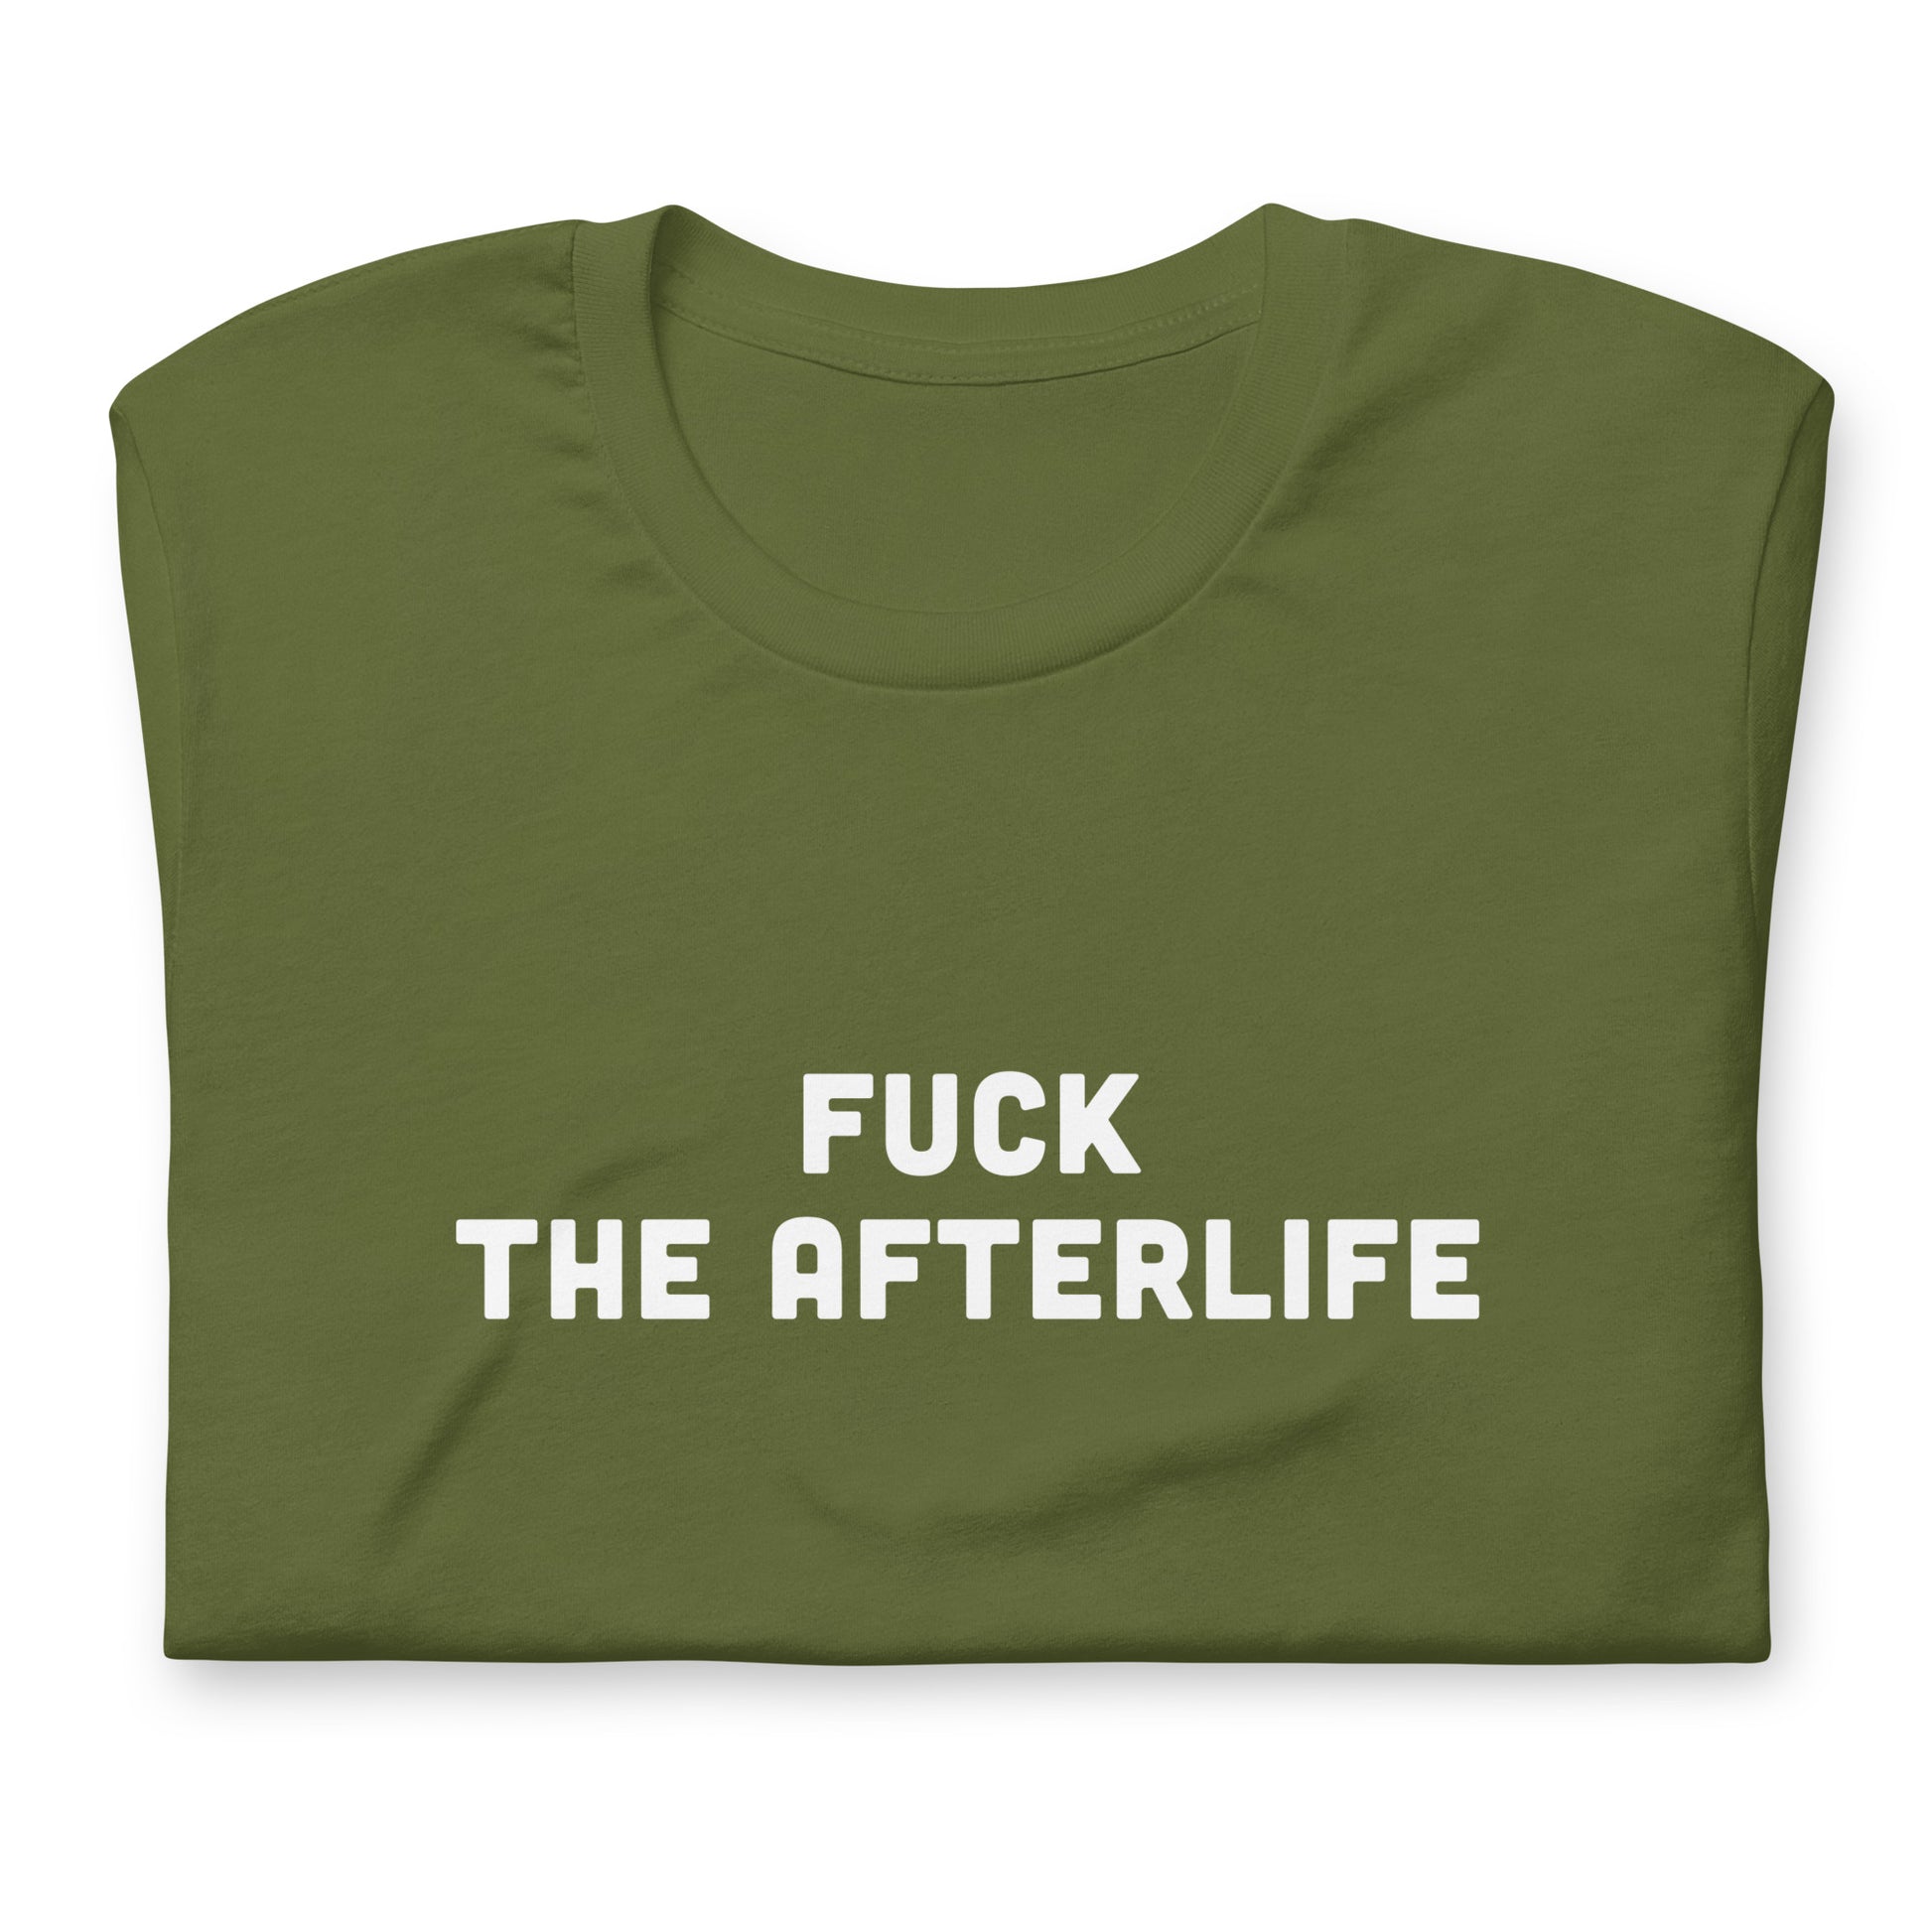 Fuck The Afterlife T-Shirt Size 2XL Color Black